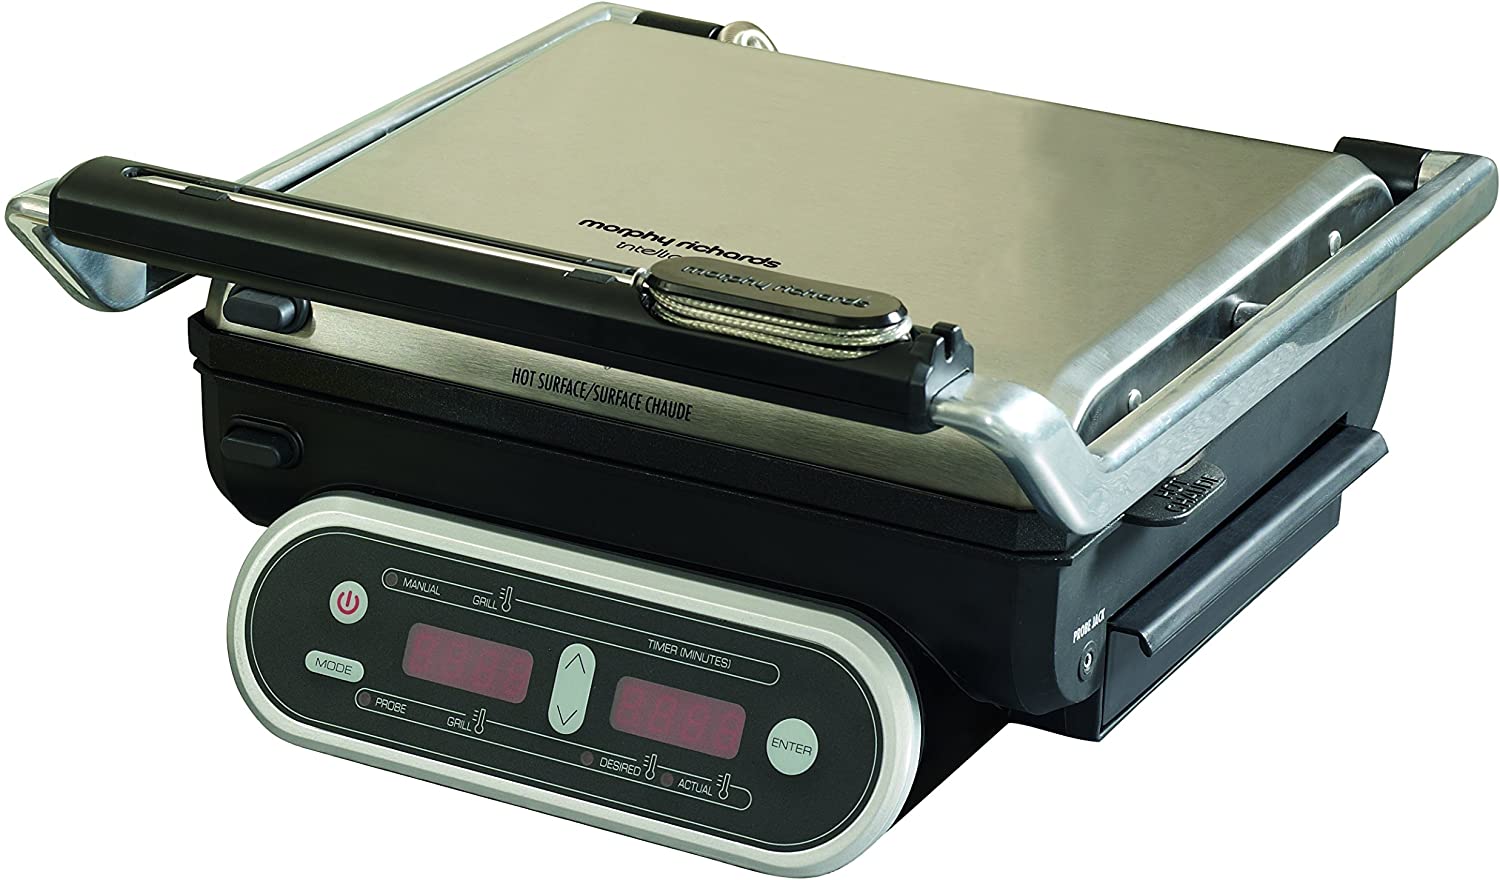 Morphy Richards Intelli Grill 48018 Digital Cooking Grill, Stainless Steel